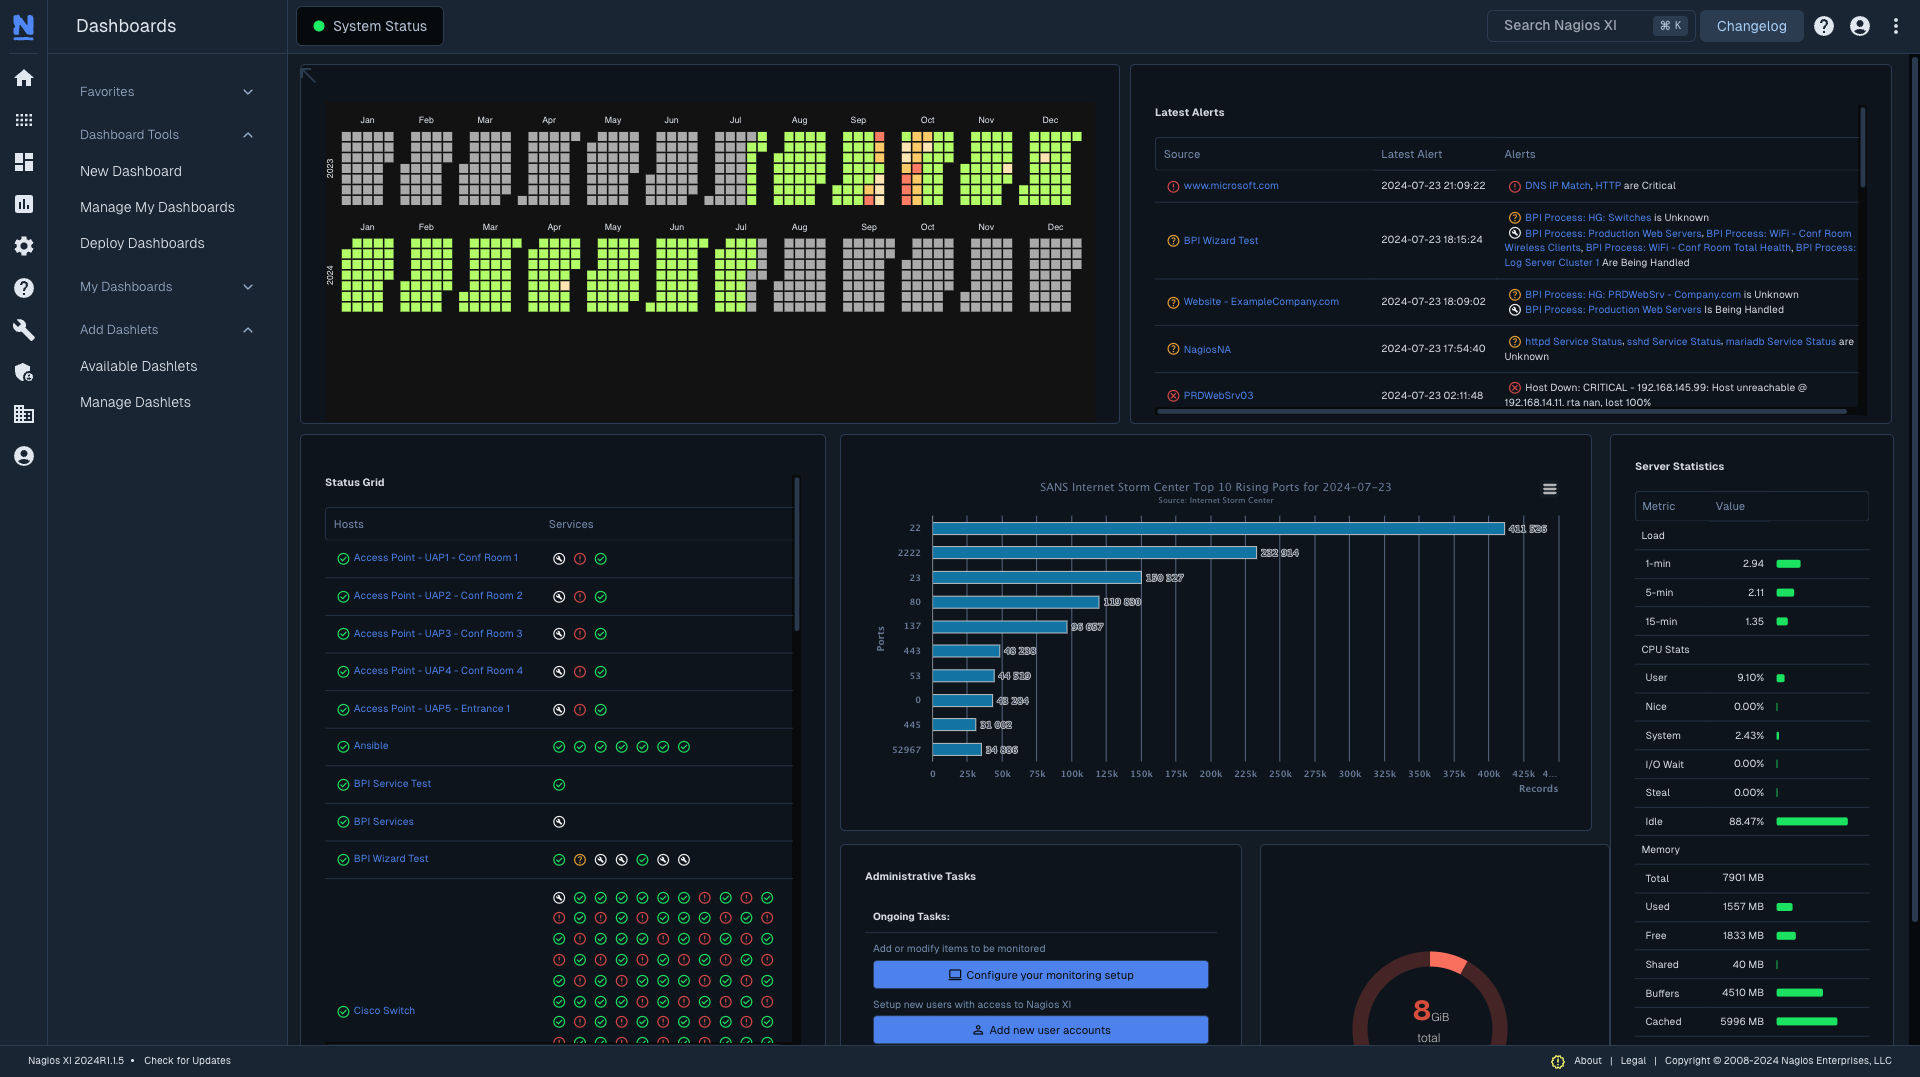 The Nagios XI dashboards allow you to see as much or as little data as you need, and are flexible to fit your organizaiton's workflow.